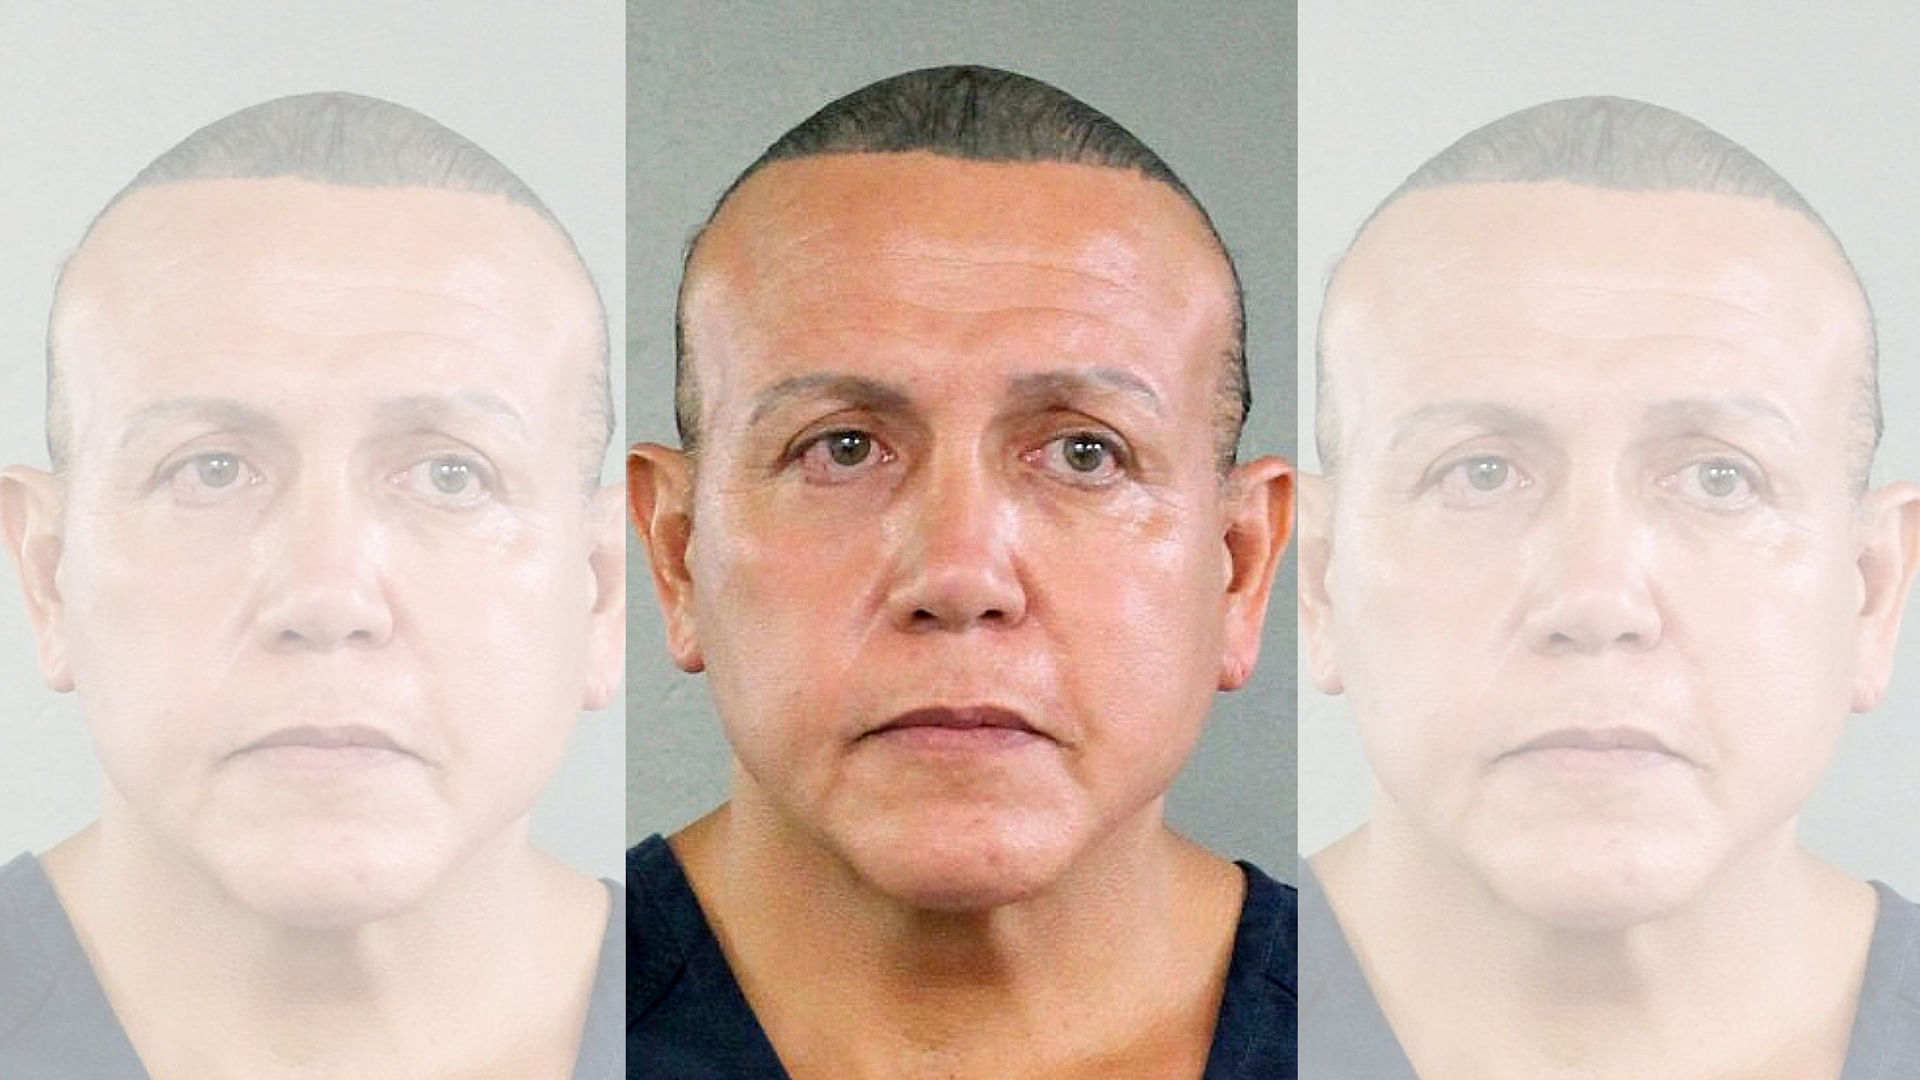 Cesar Sayoc in Miami, the Florida man who authorities say sent pipe bombs to prominent critics of US President Donald Trump.